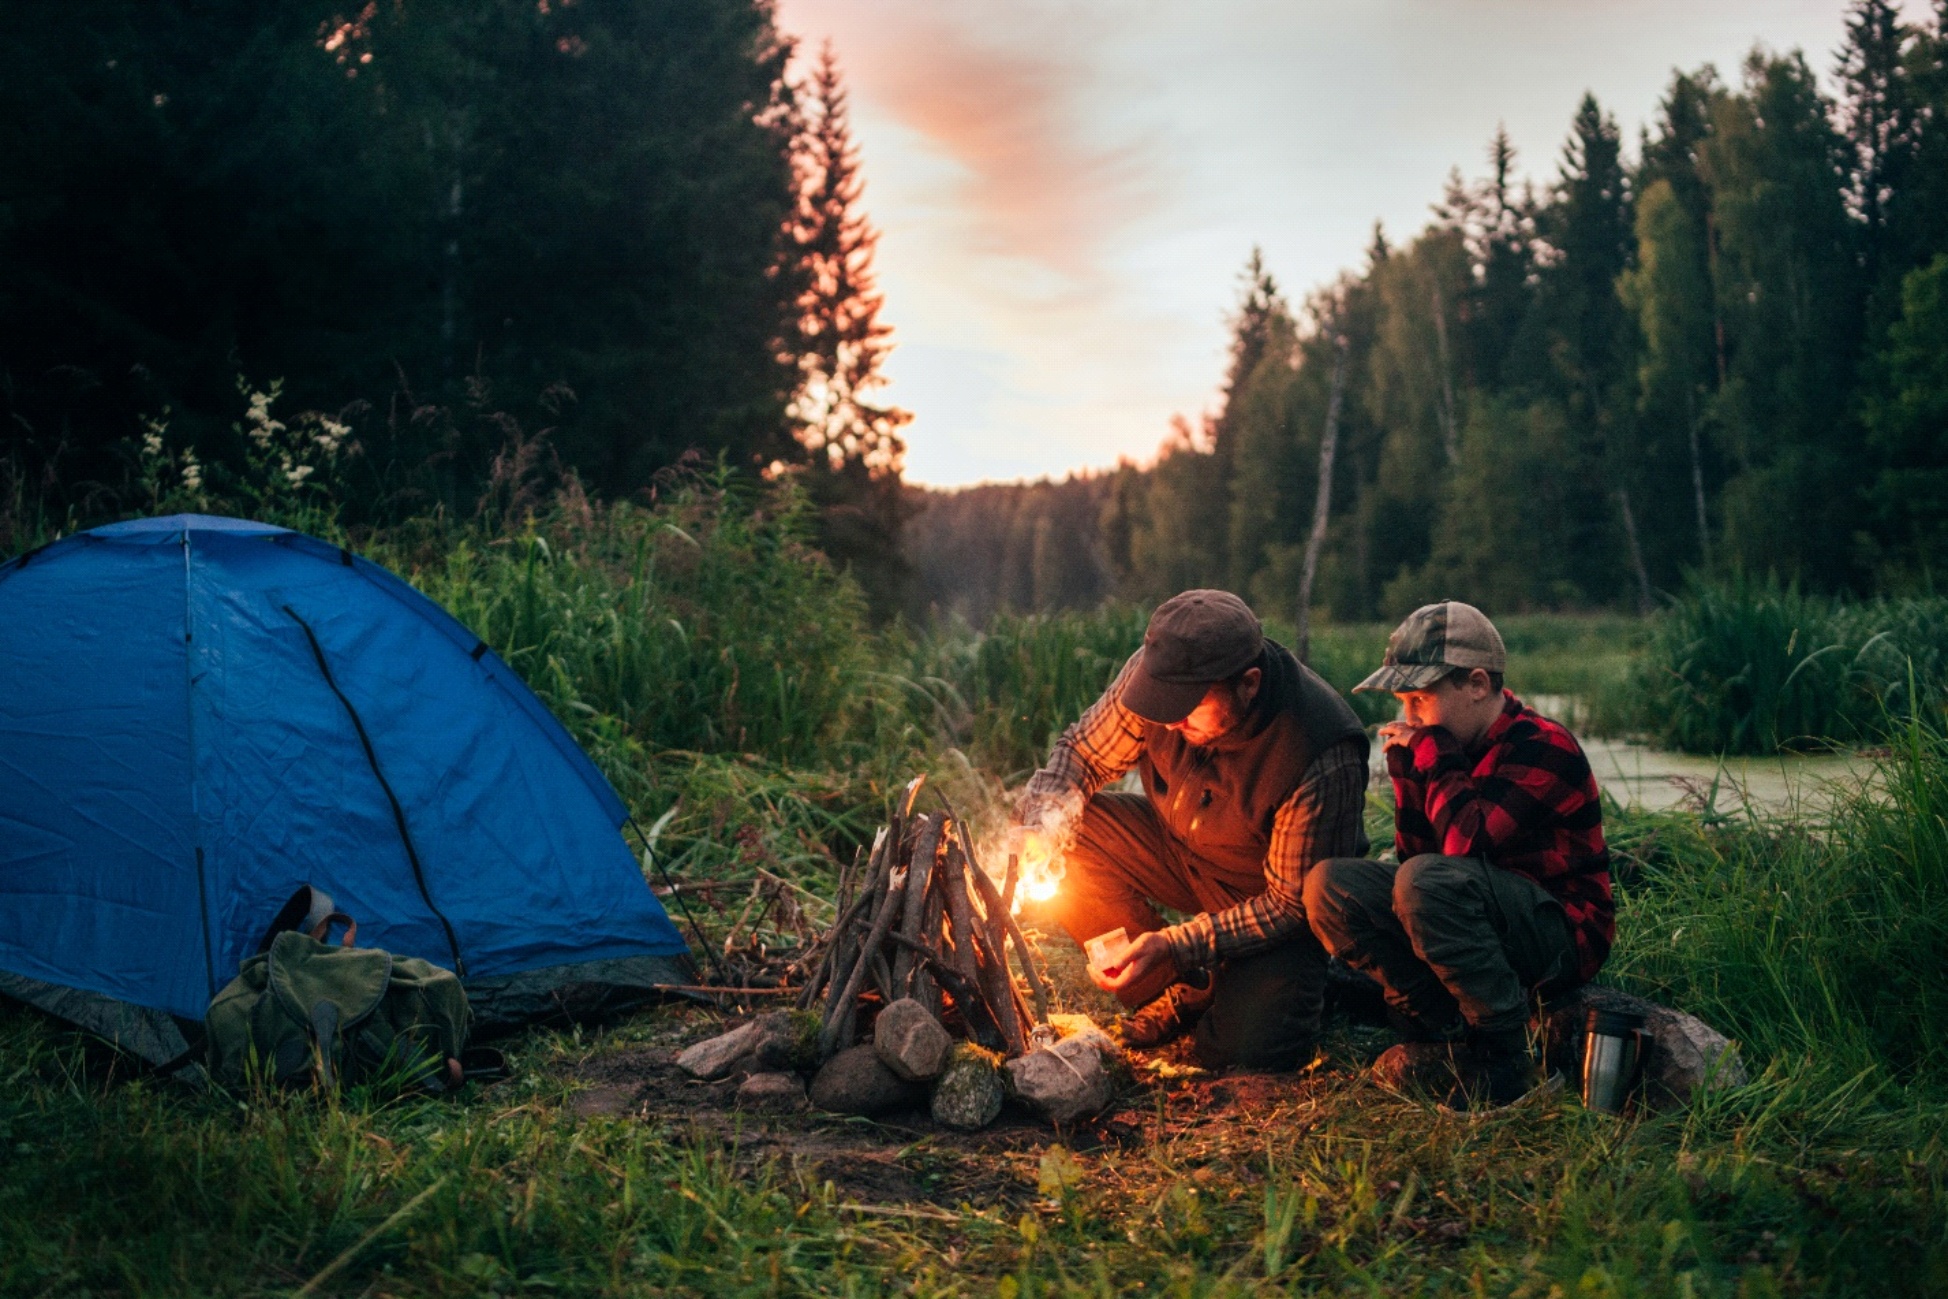 Camping as a family